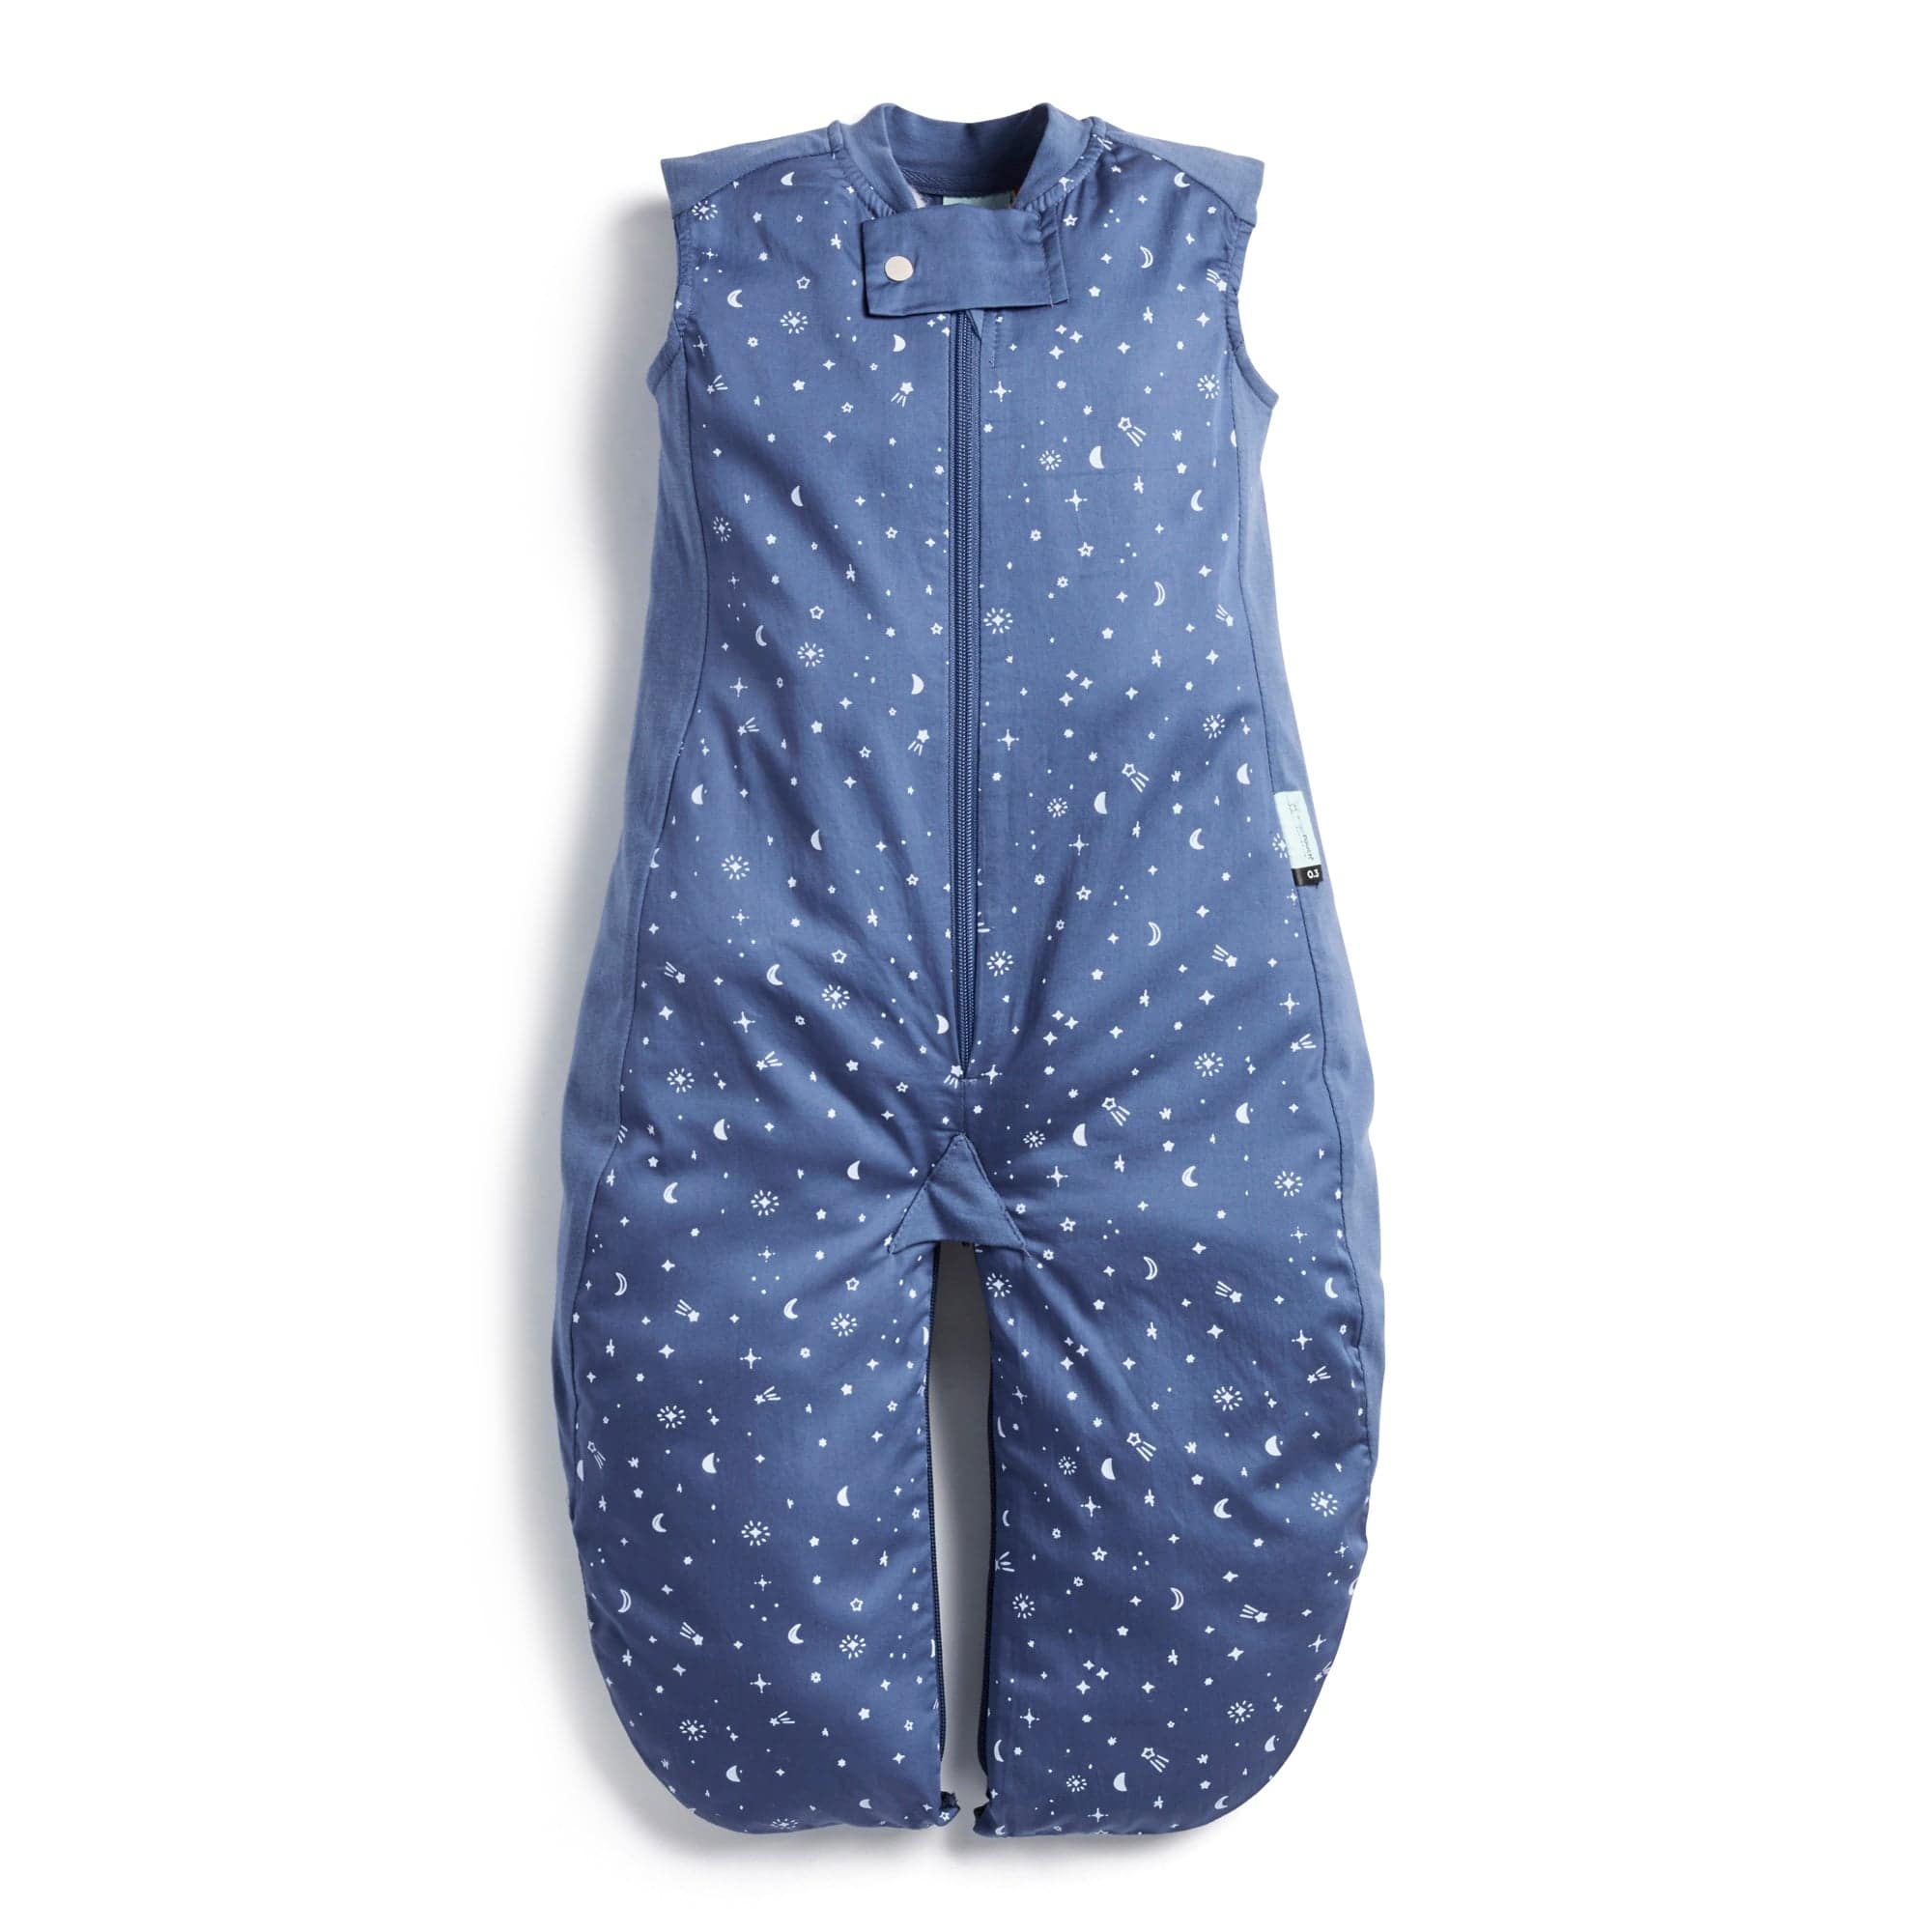 Sleep Suit Bag 1.0 Tog For Kids By ergoPouch - Night Sky